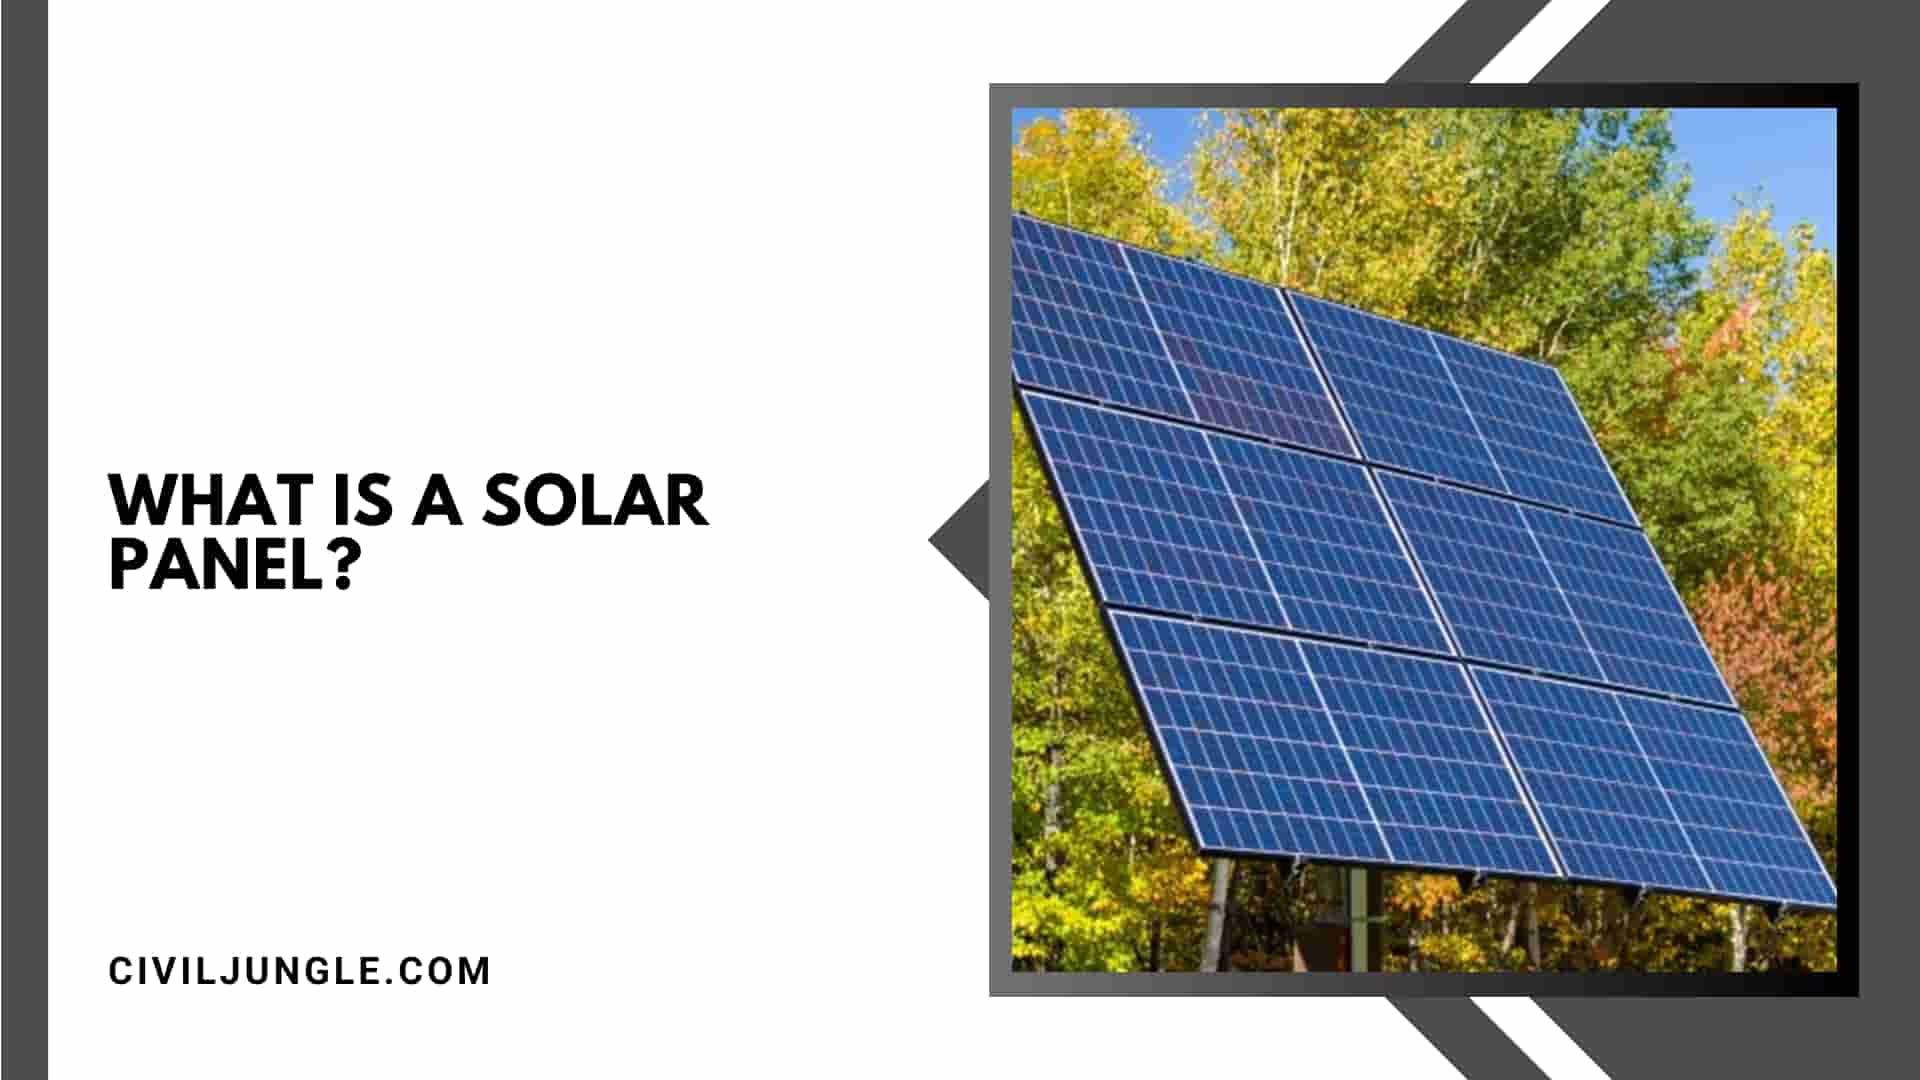 What Is a Solar Panel?